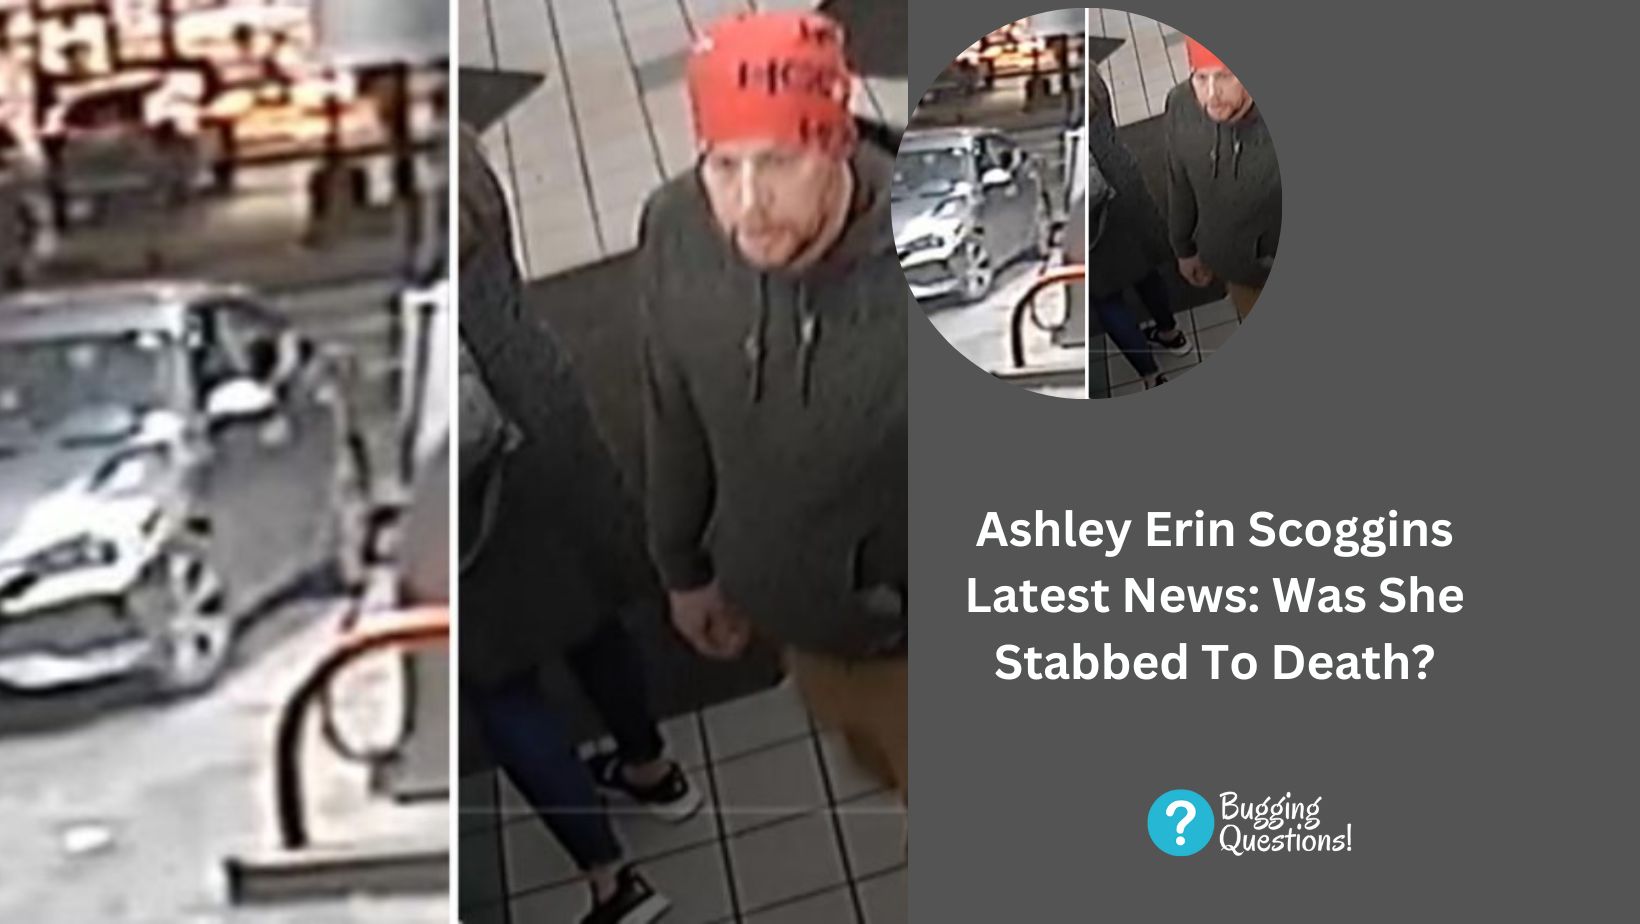 Ashley Erin Scoggins Latest News: Was She Stabbed To Death?